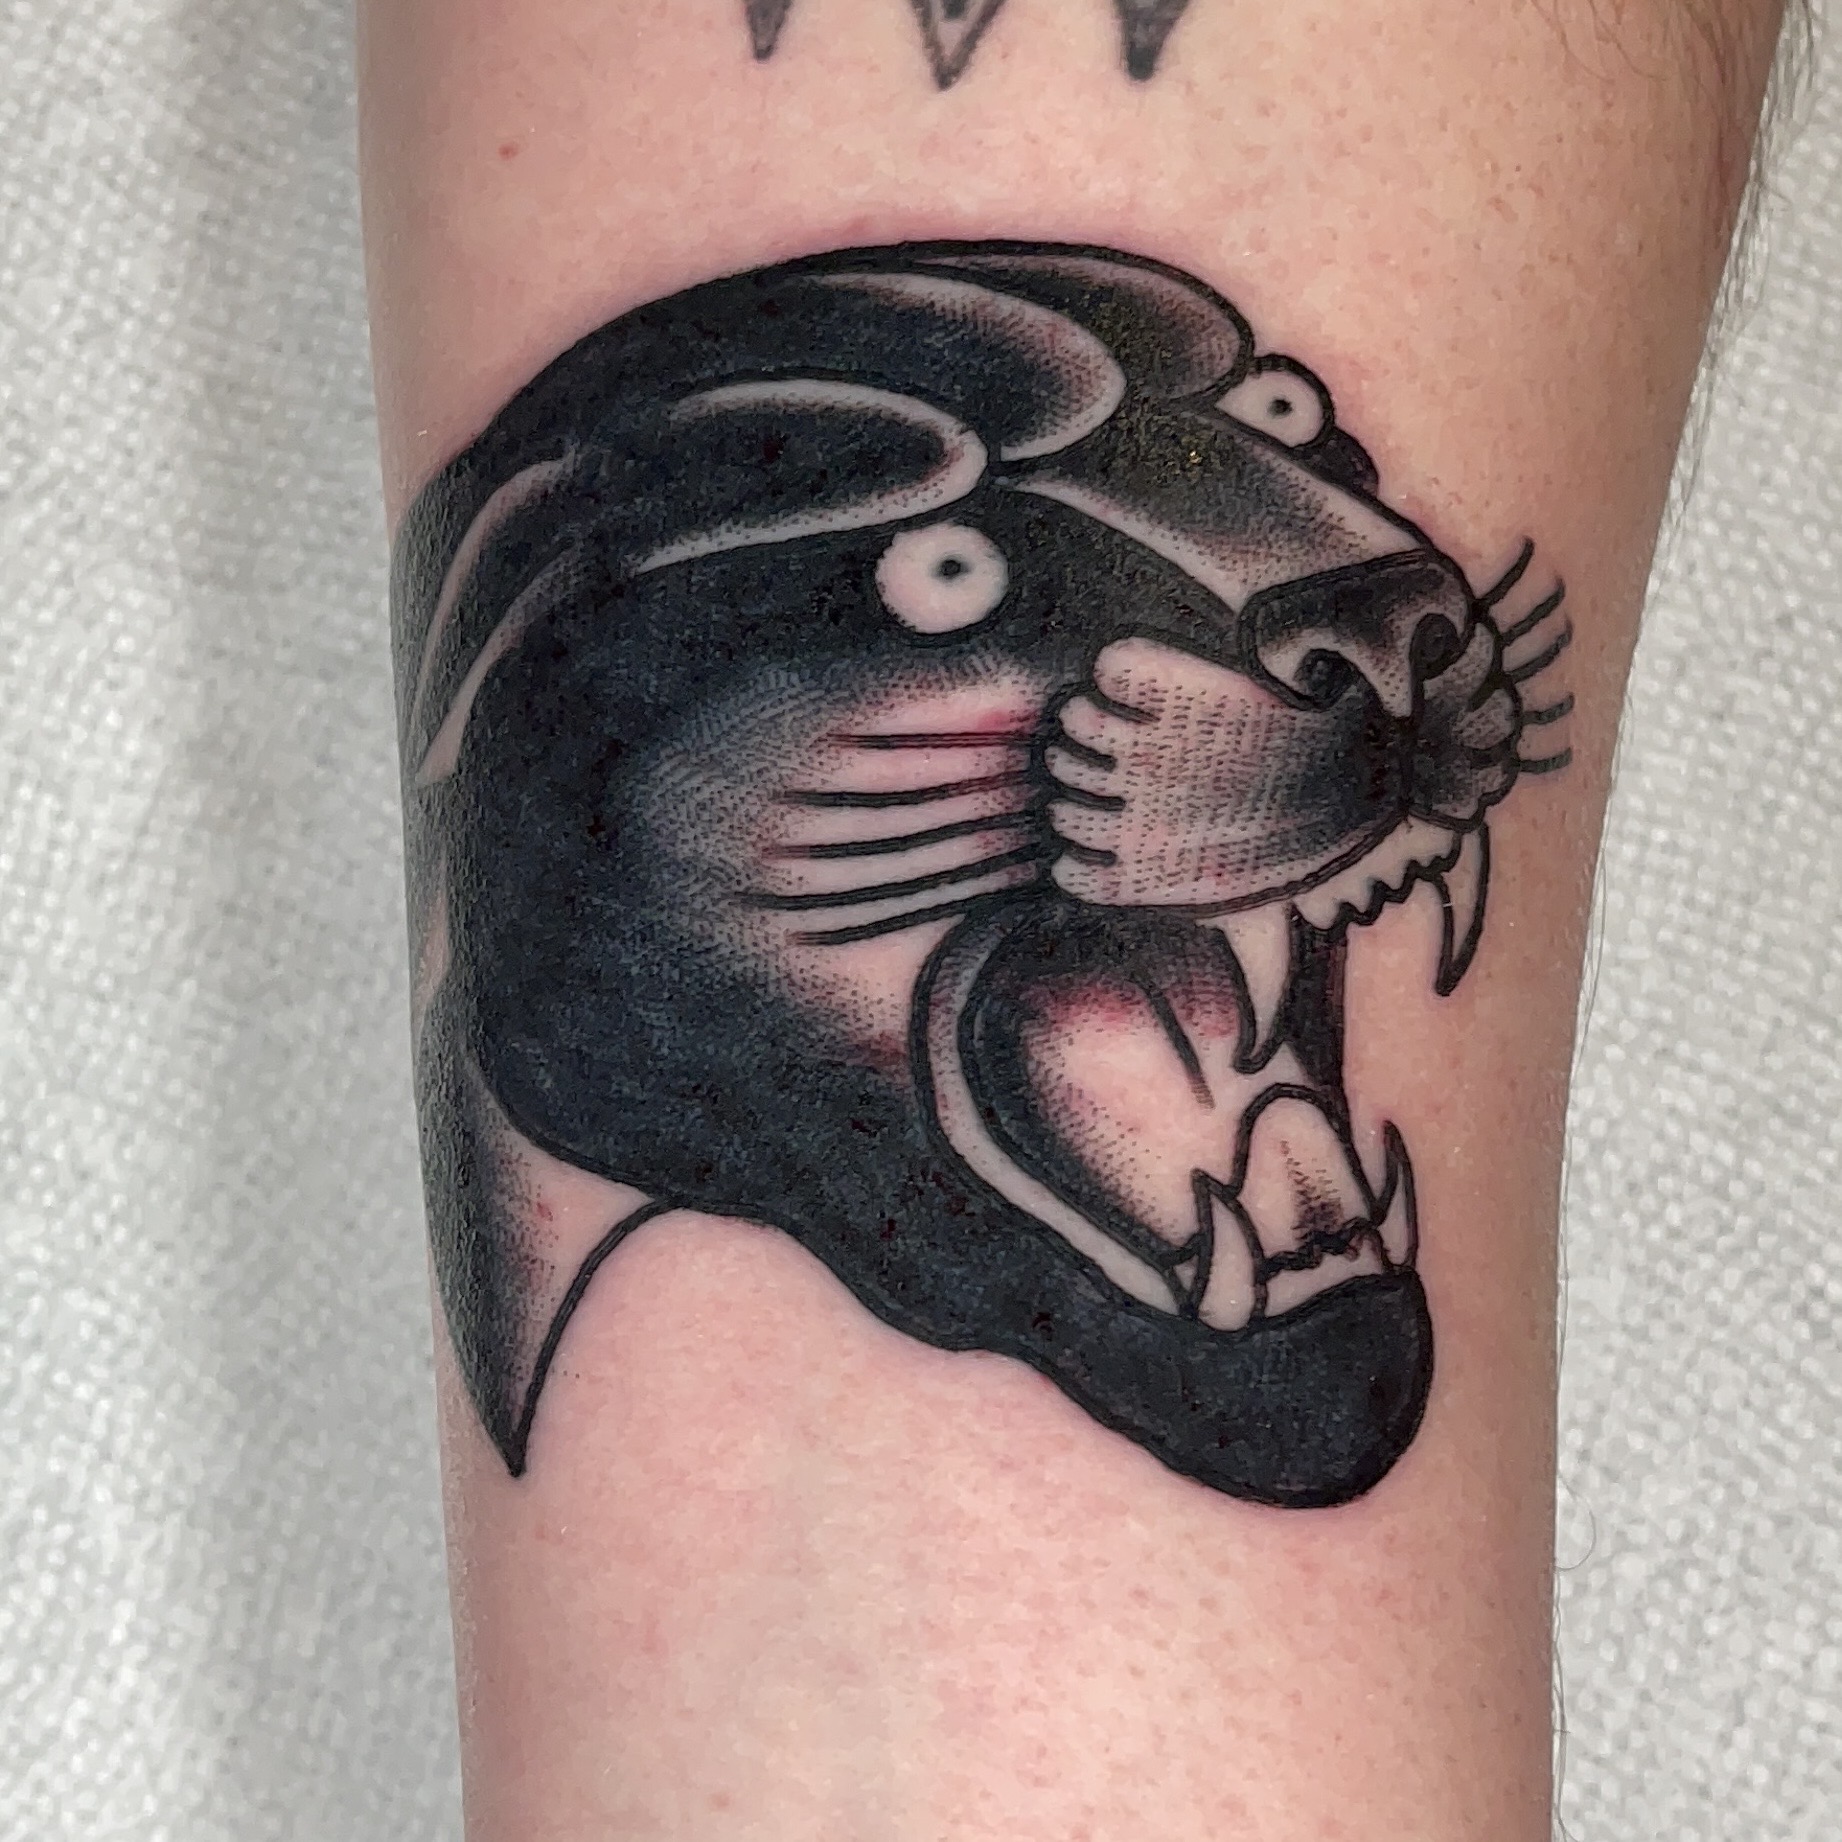 Tattoo of a panther from top Dallas tattoo artist